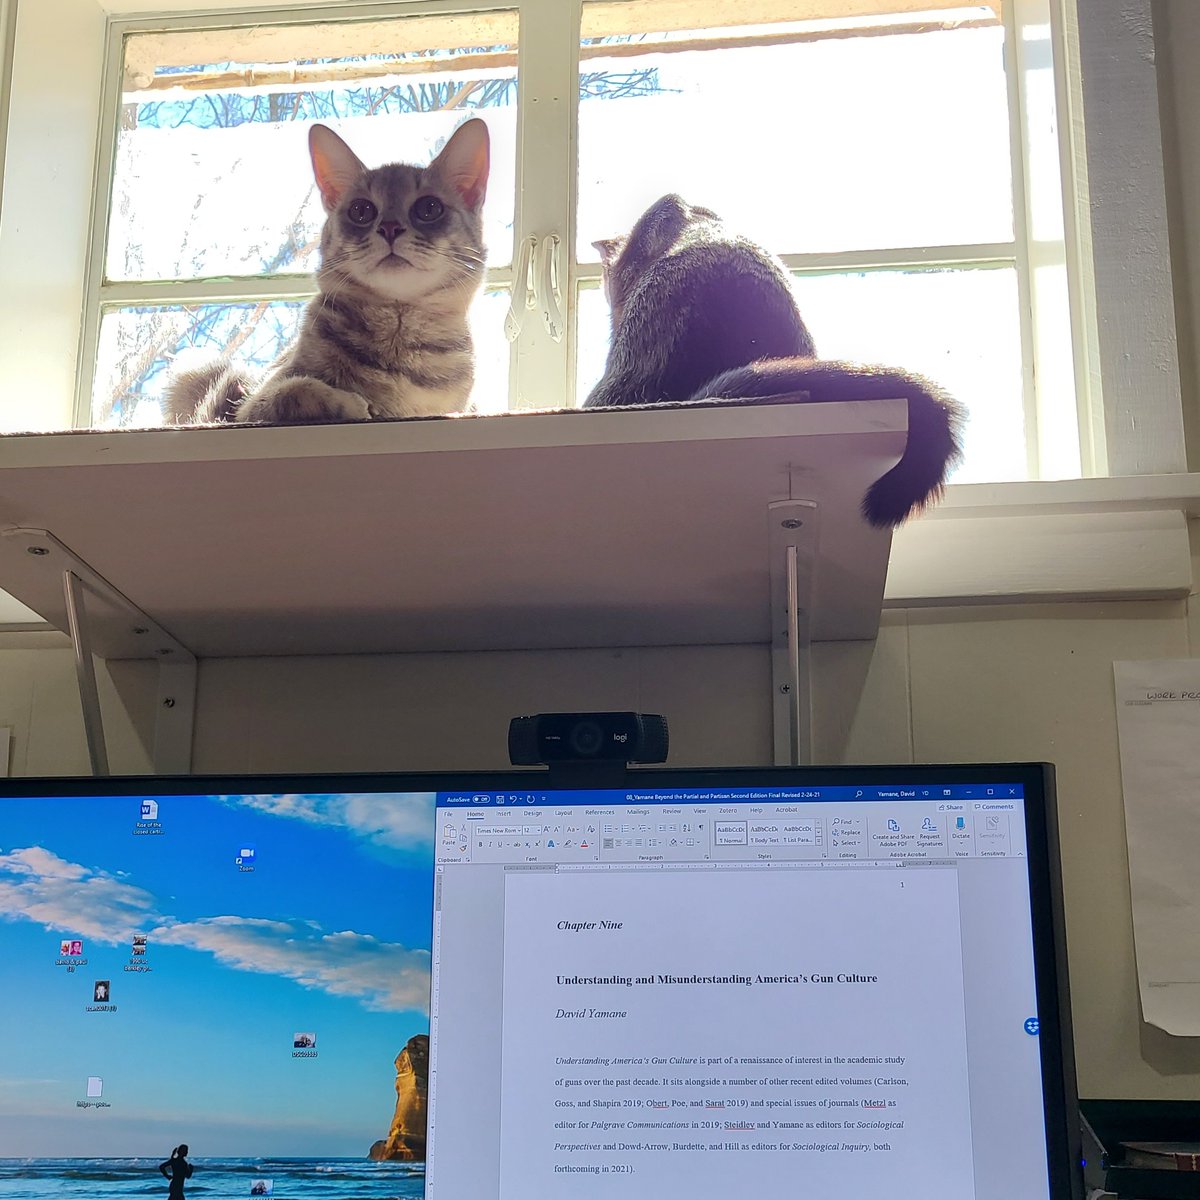 Wed, Feb 24 - Book Day #18-Day off from book to revise chapter on "Understanding & Misunderstanding America's Gun Culture." Tightened it up & added 700 words.-New cats are starting to get the hang of being writing accountability partners. #writingaccountability  #CatsOfTwitter